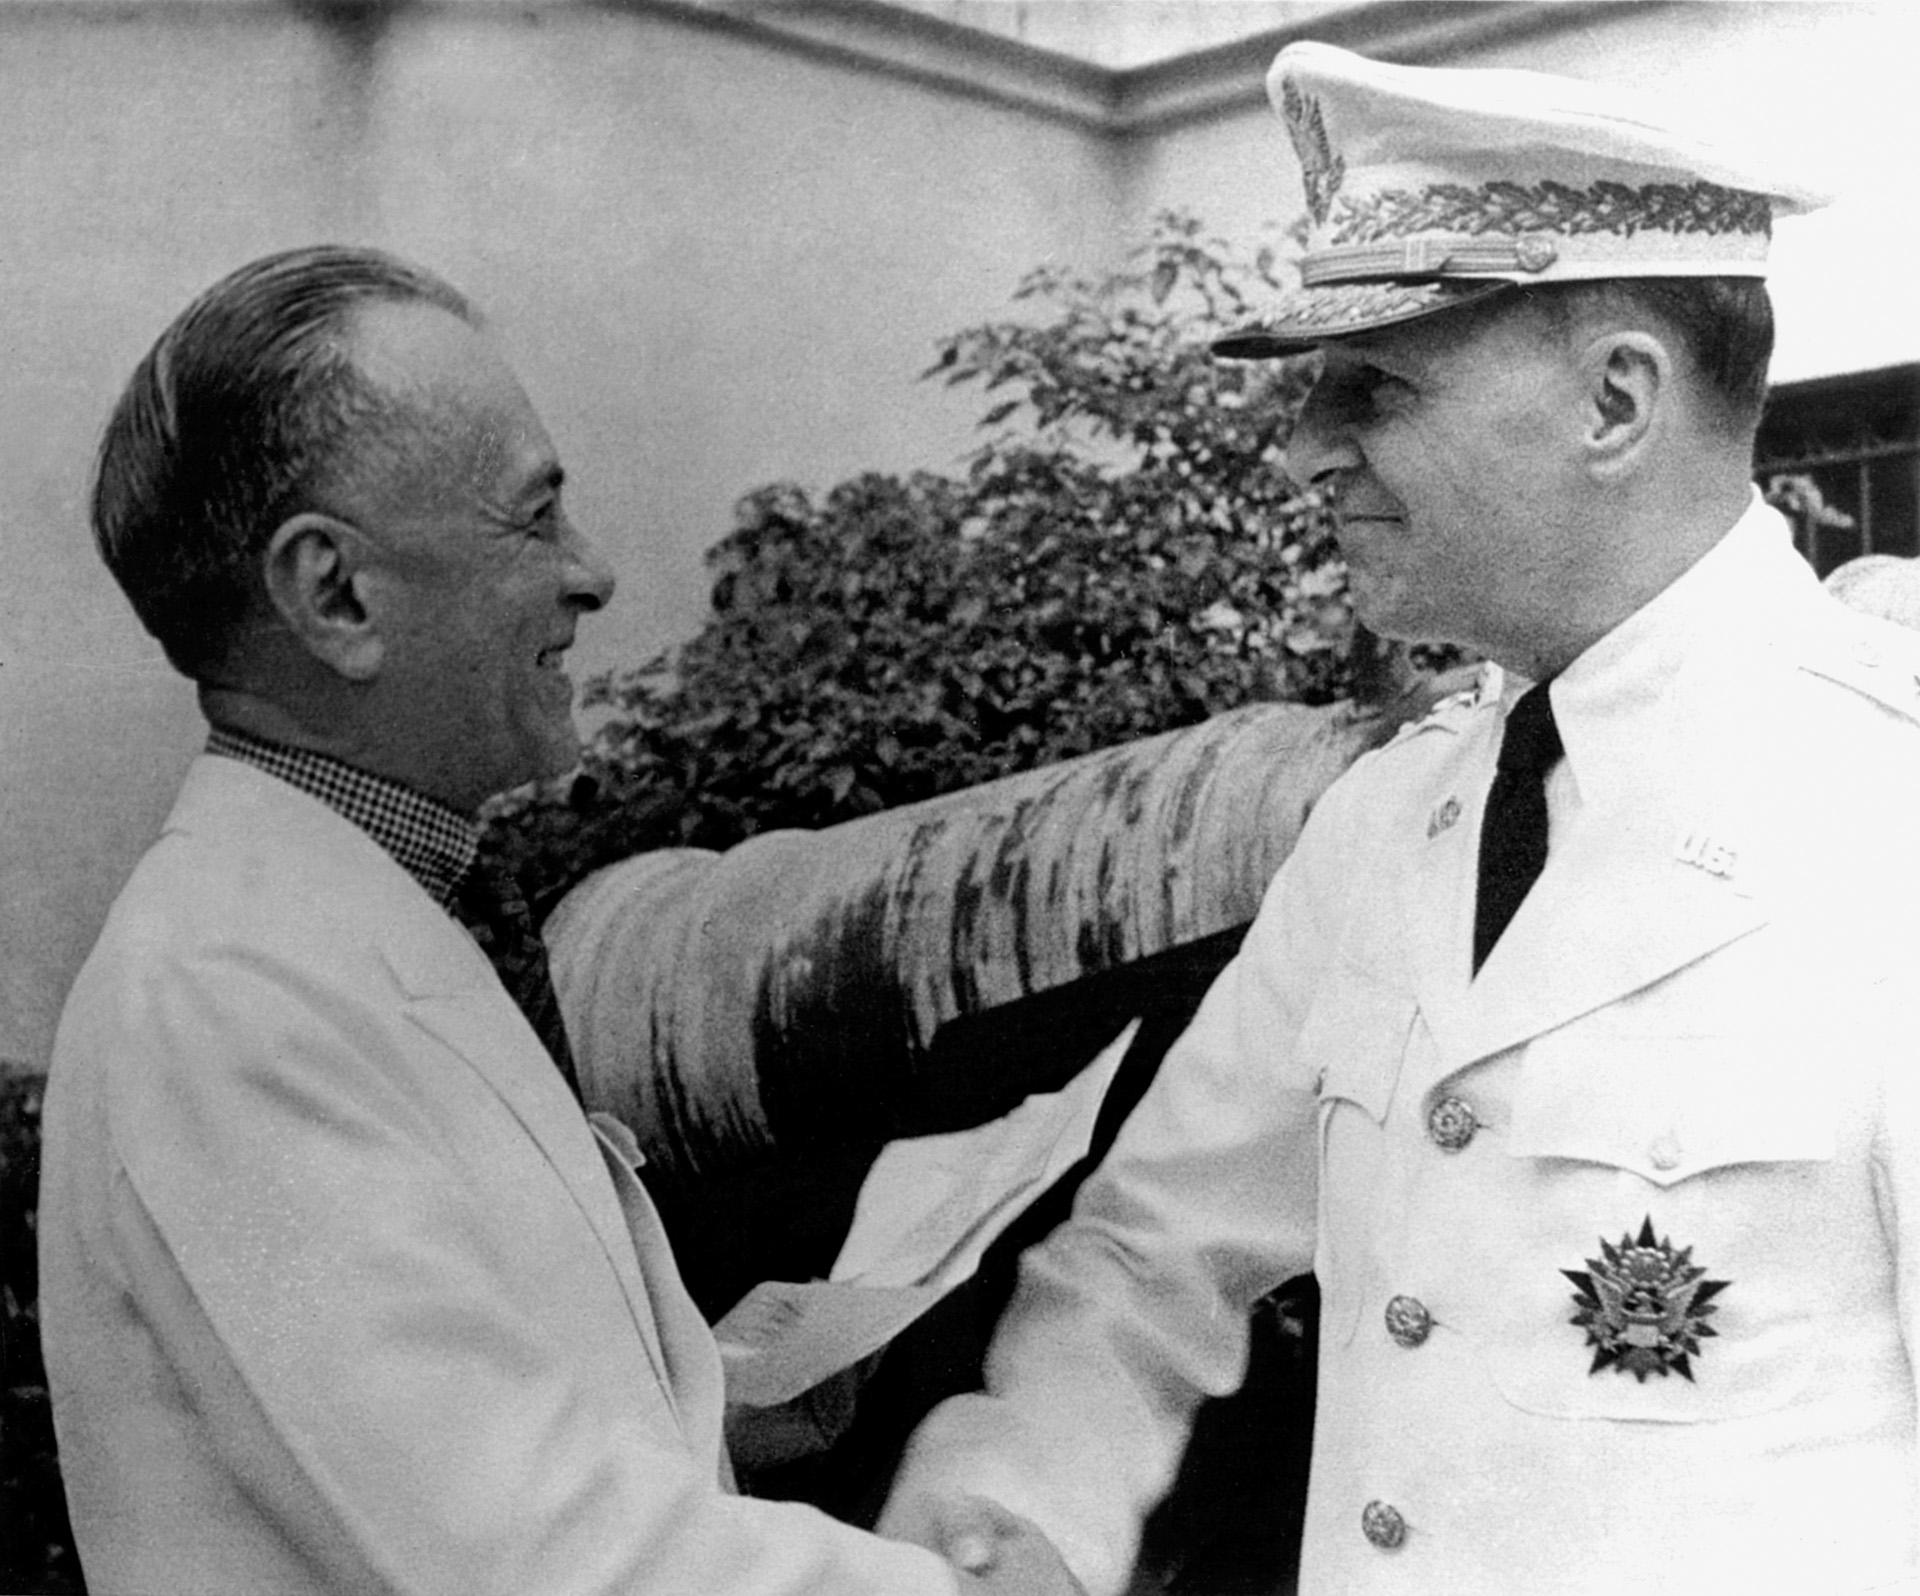 General MacArthur and Filipino President Manuel Quezon greet each other cordially. 